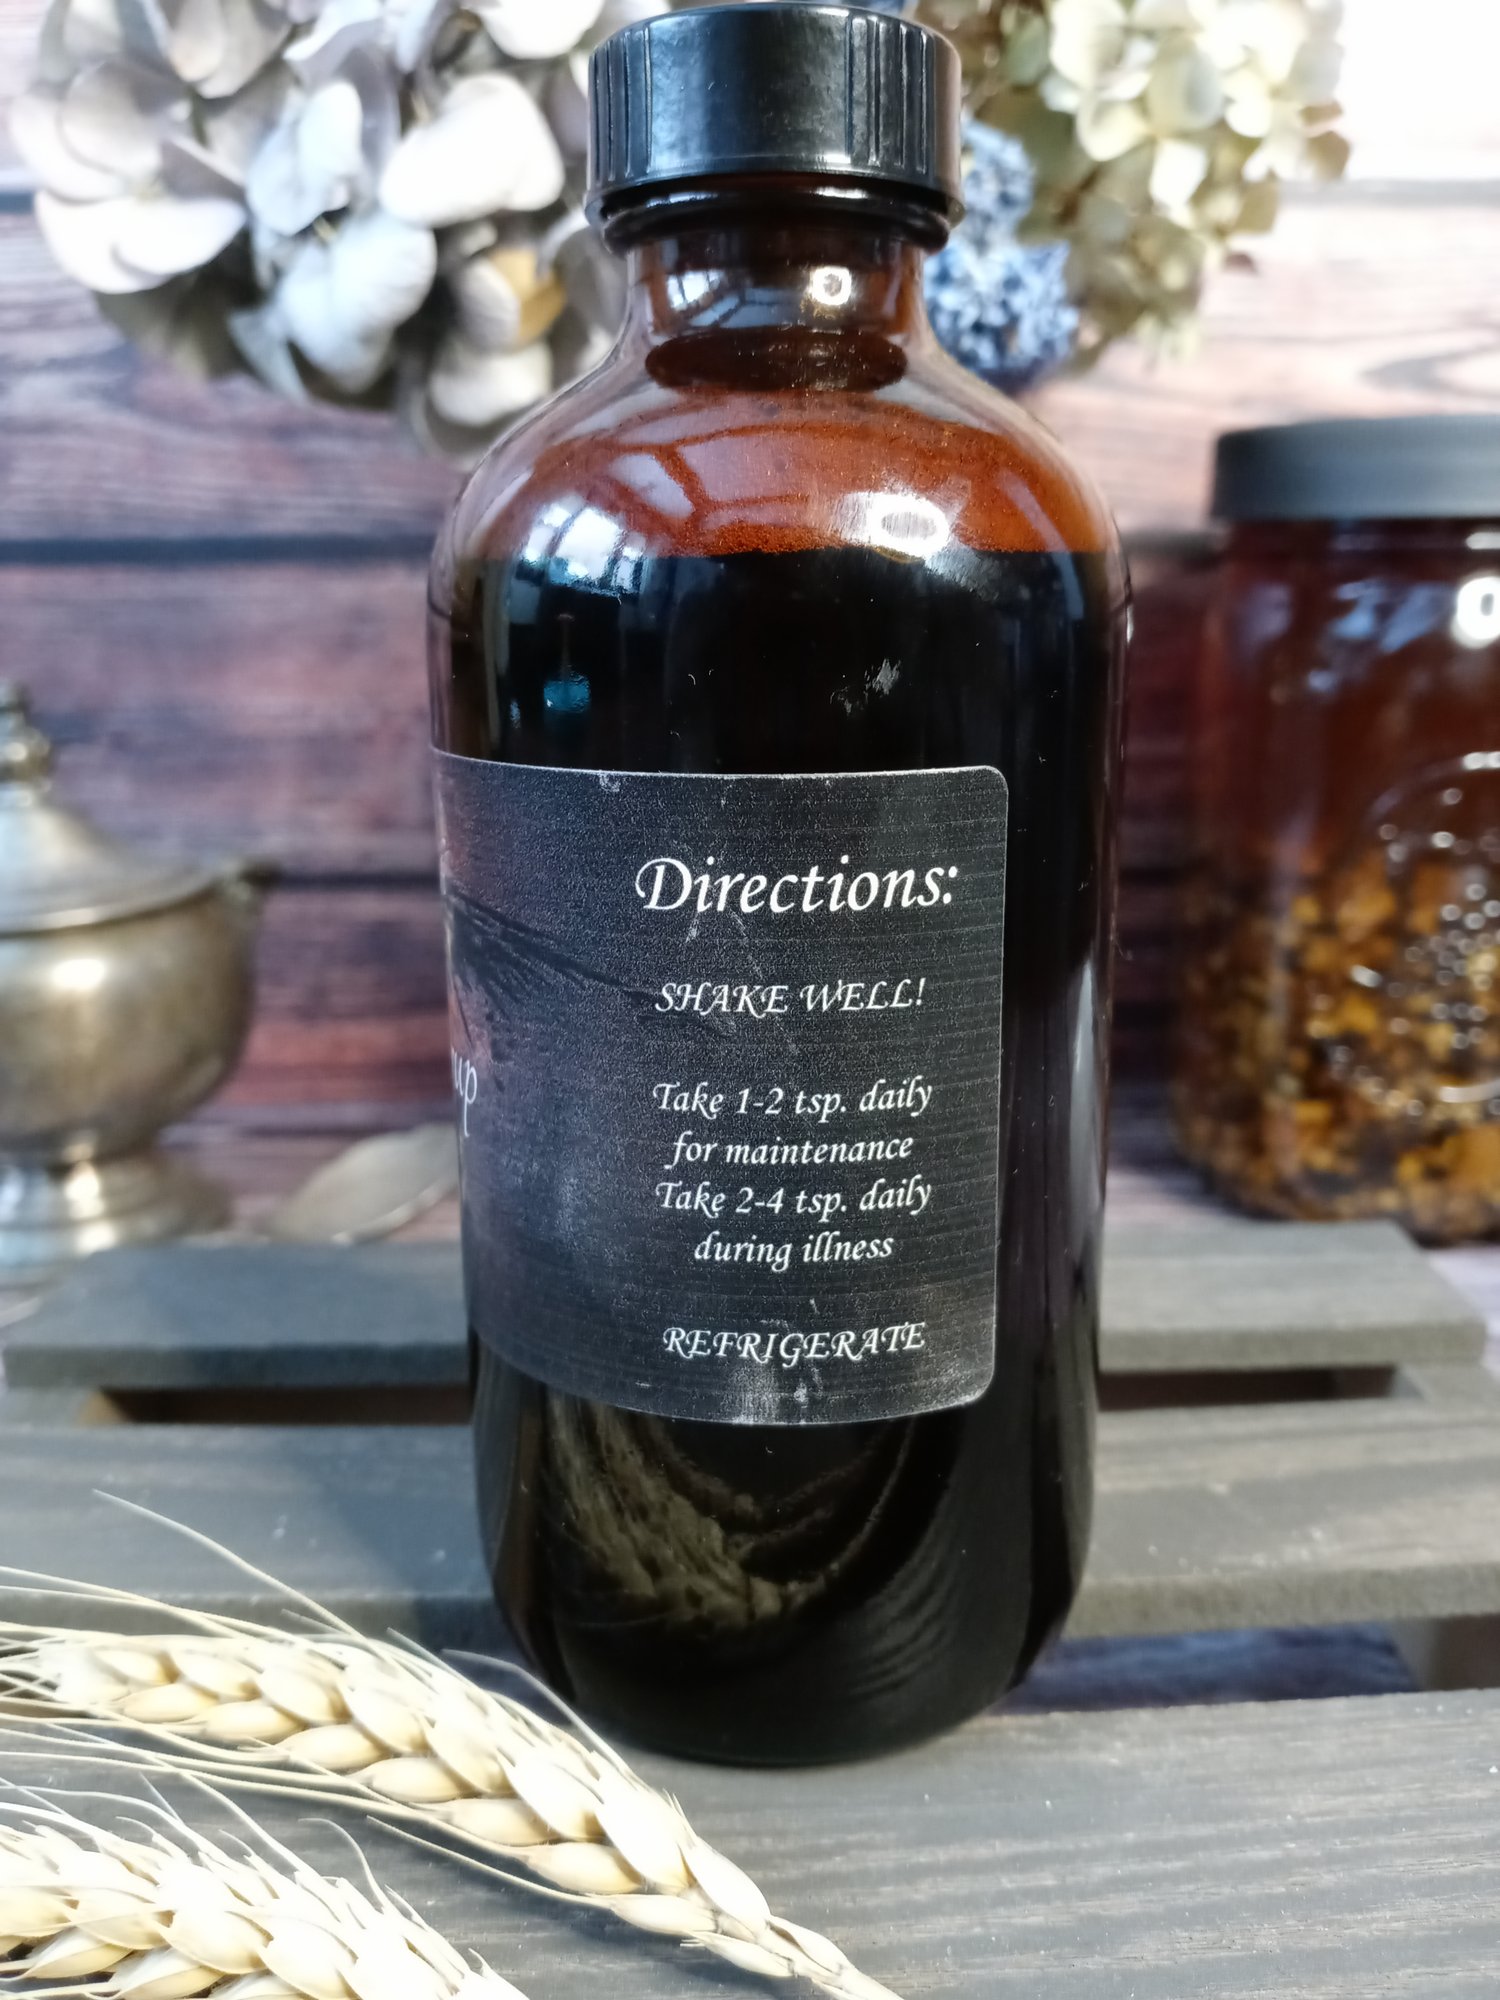 Image of Elderberry Syrup with Immune Boosting Adaptogens (8oz. & 16oz.)